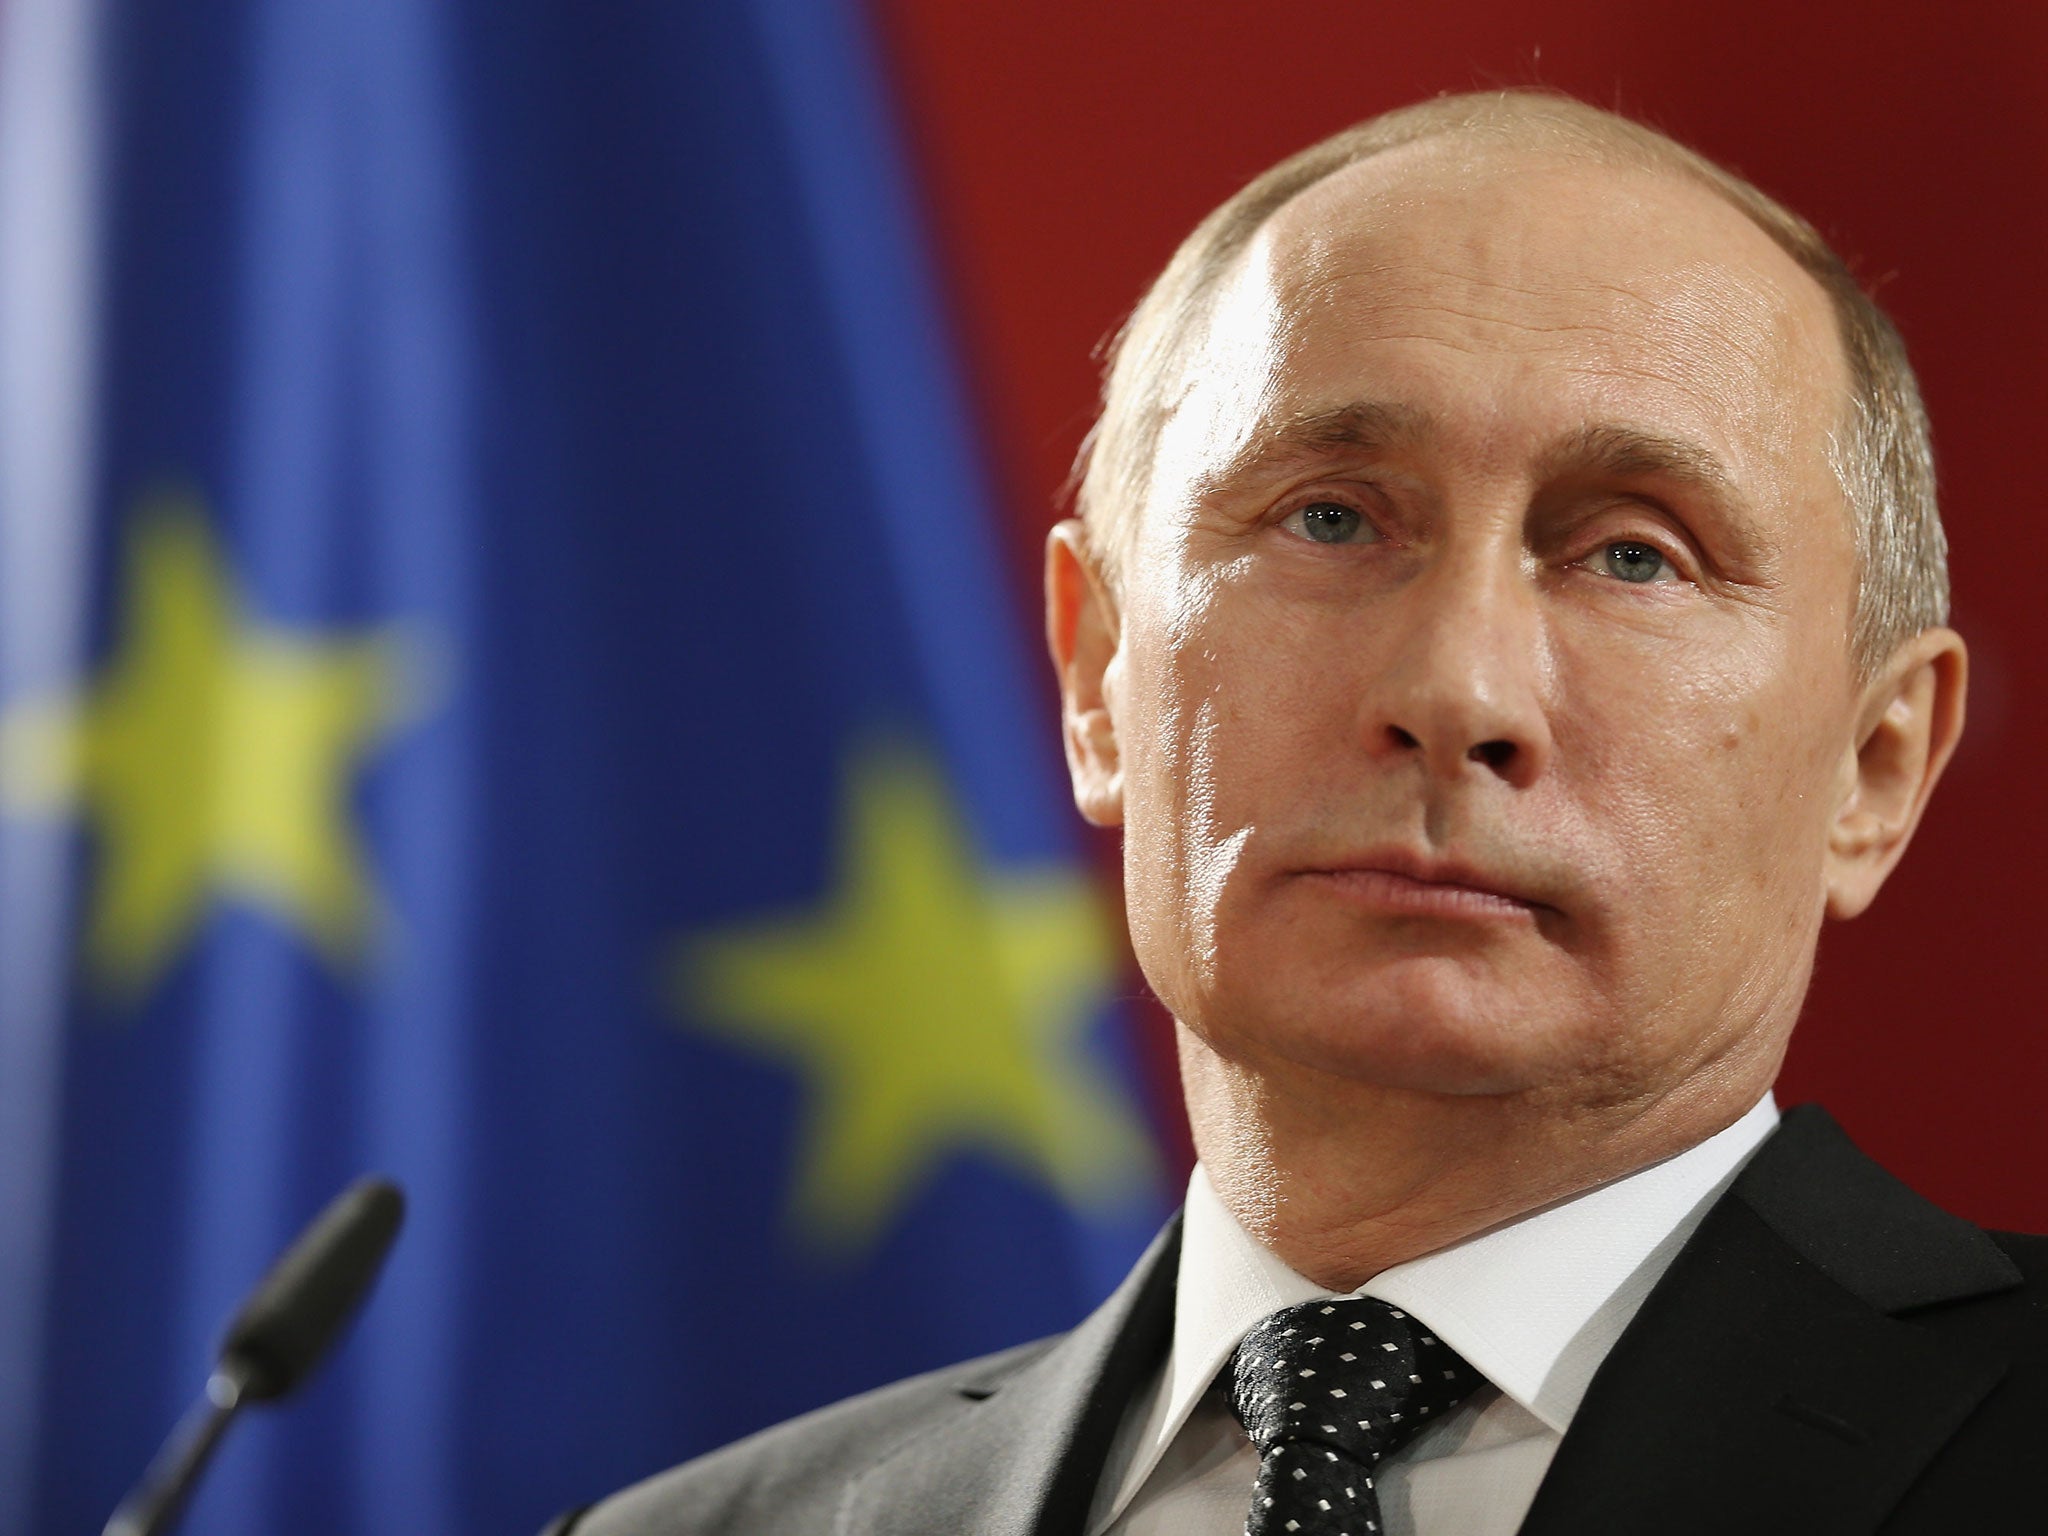 Vladimir Putin is the only world leader understood to favour a British exit from the European Union.